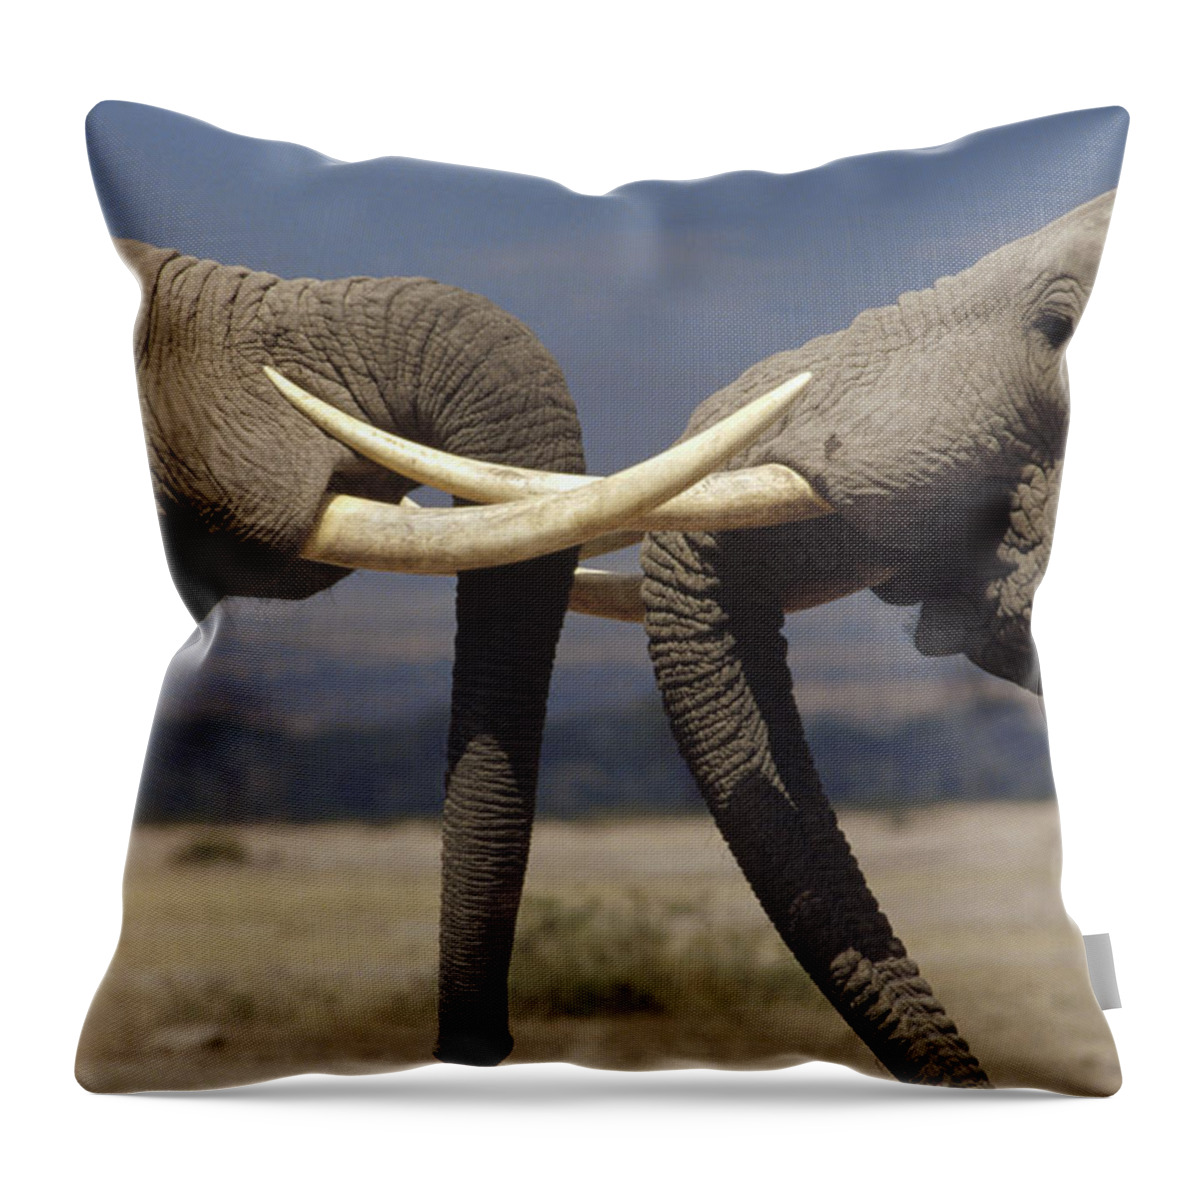 002201029 Throw Pillow featuring the photograph Elephant Bulls in Ritual Greeting by Gerry Ellis